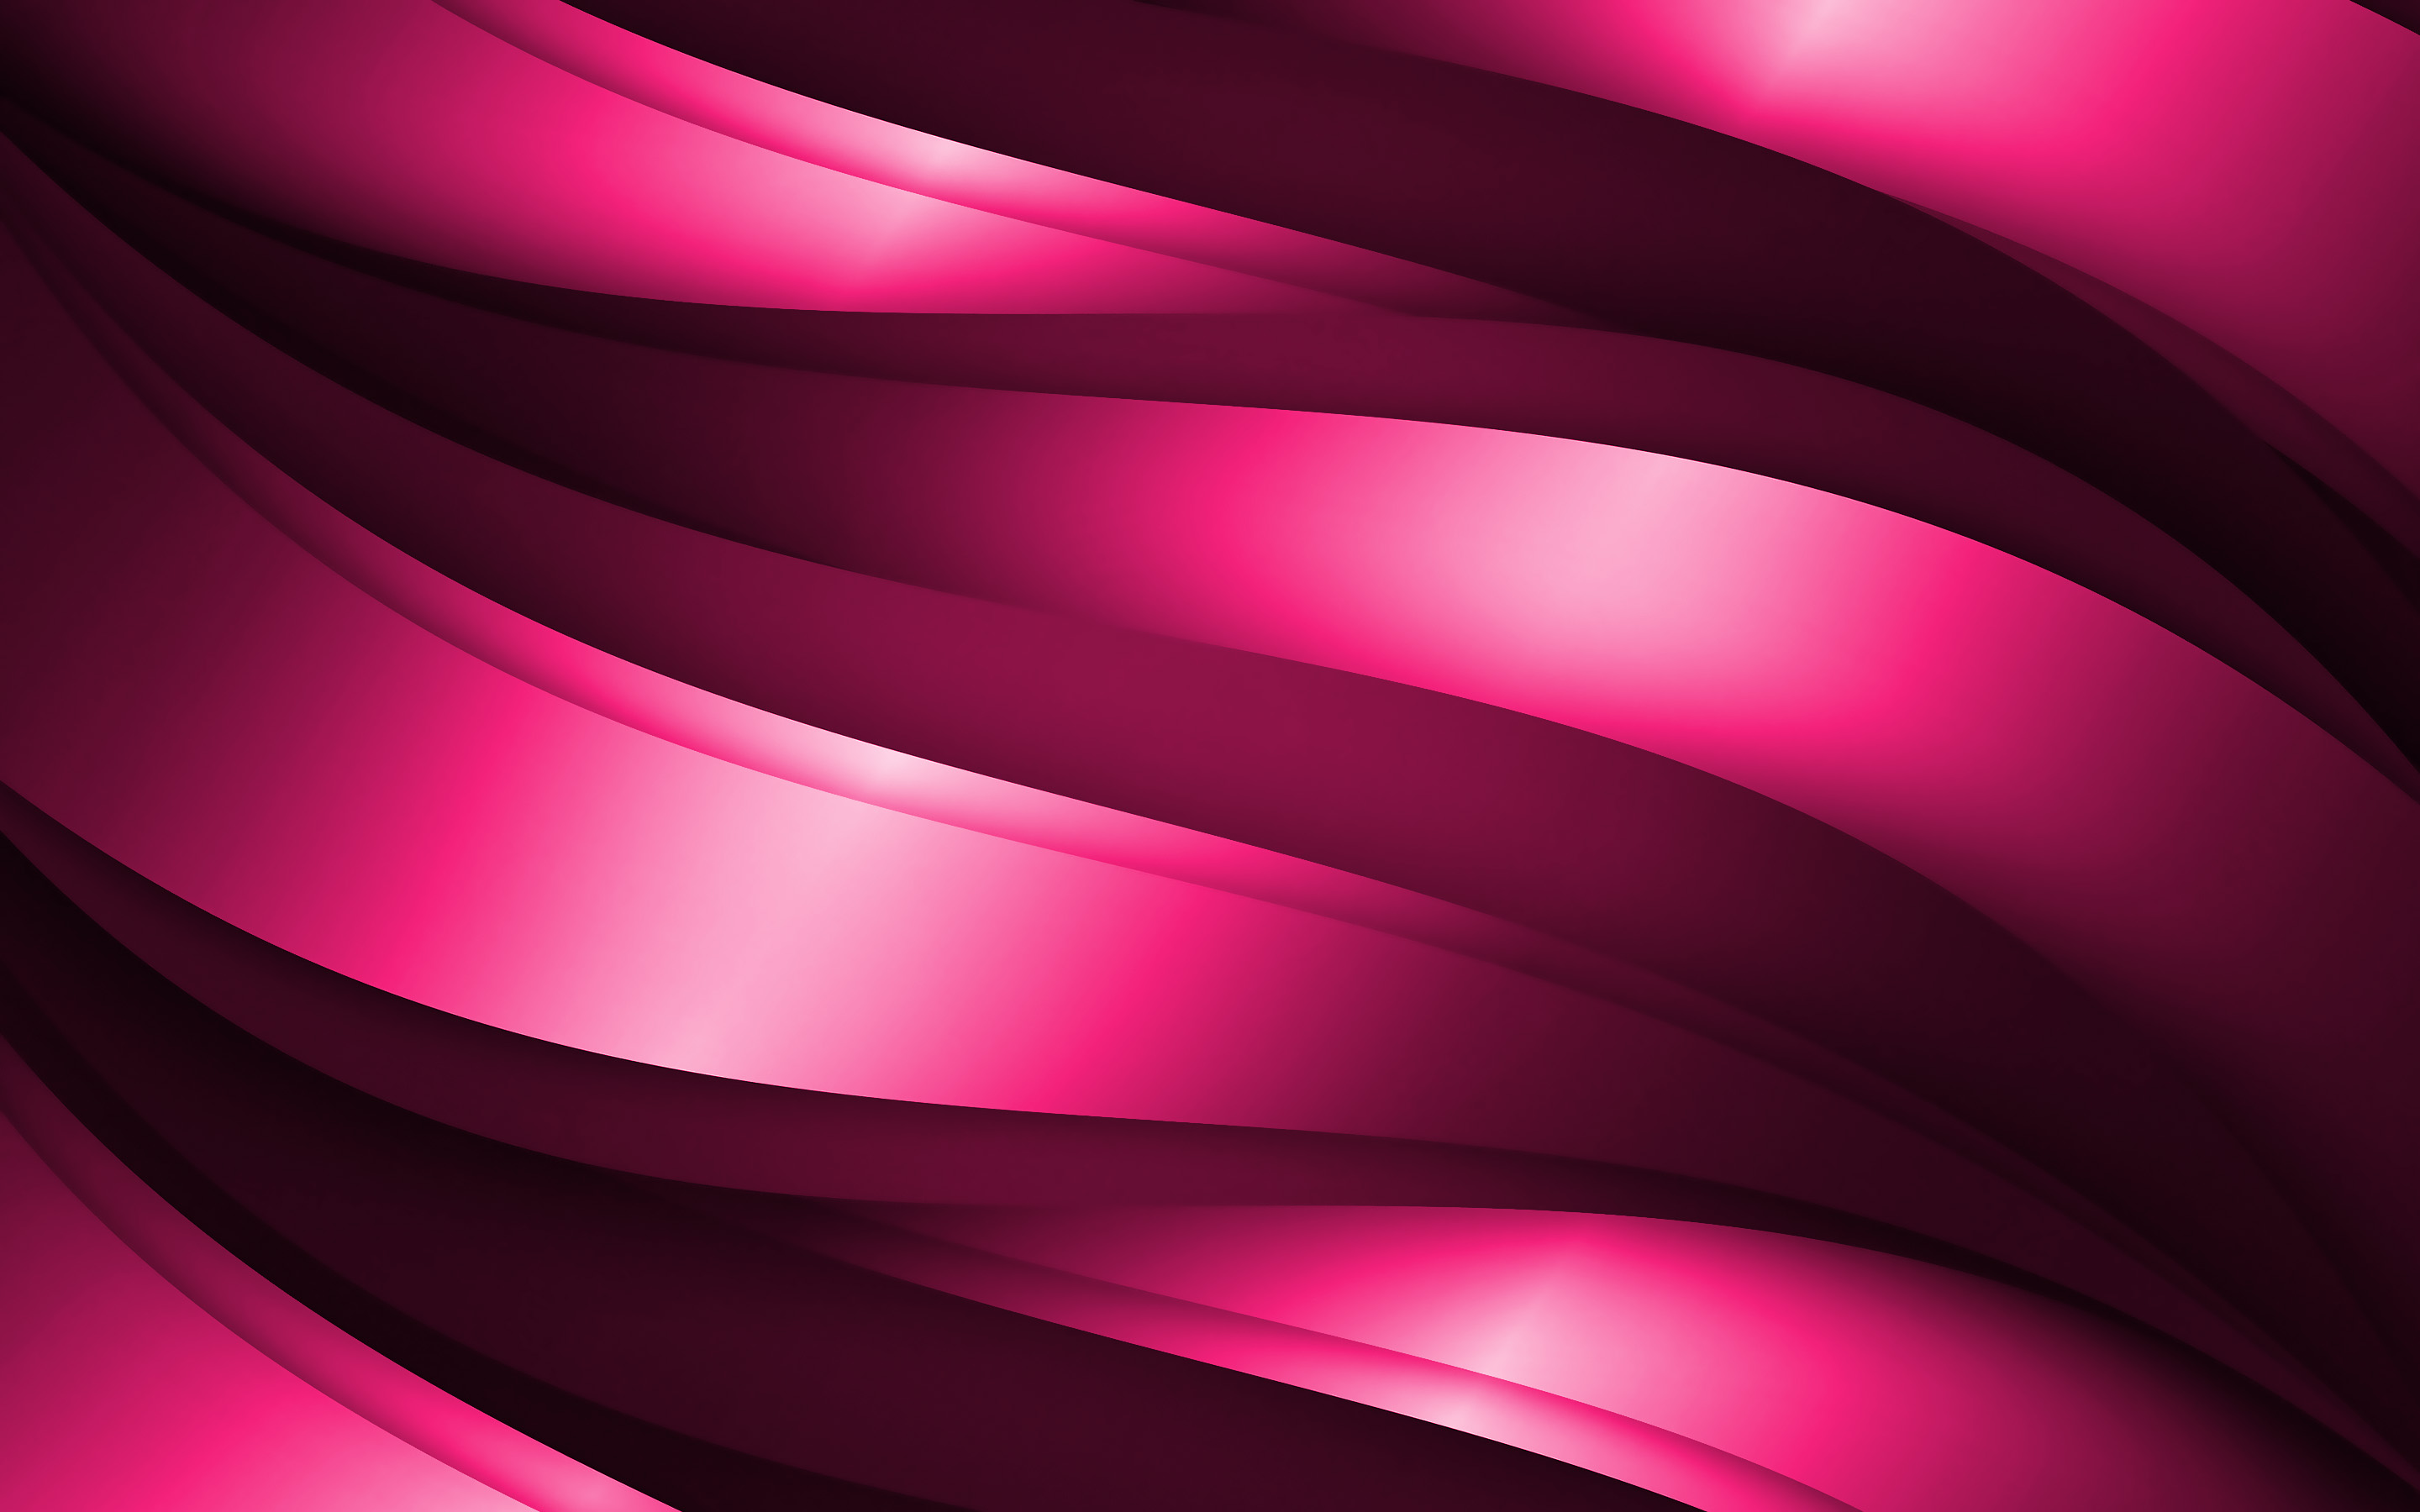 Download wallpaper pink 3D waves, abstract waves patterns, waves background, 3D waves, pink wavy background, 3D waves textures, wavy textures, background with waves for desktop with resolution 2880x1800. High Quality HD picture